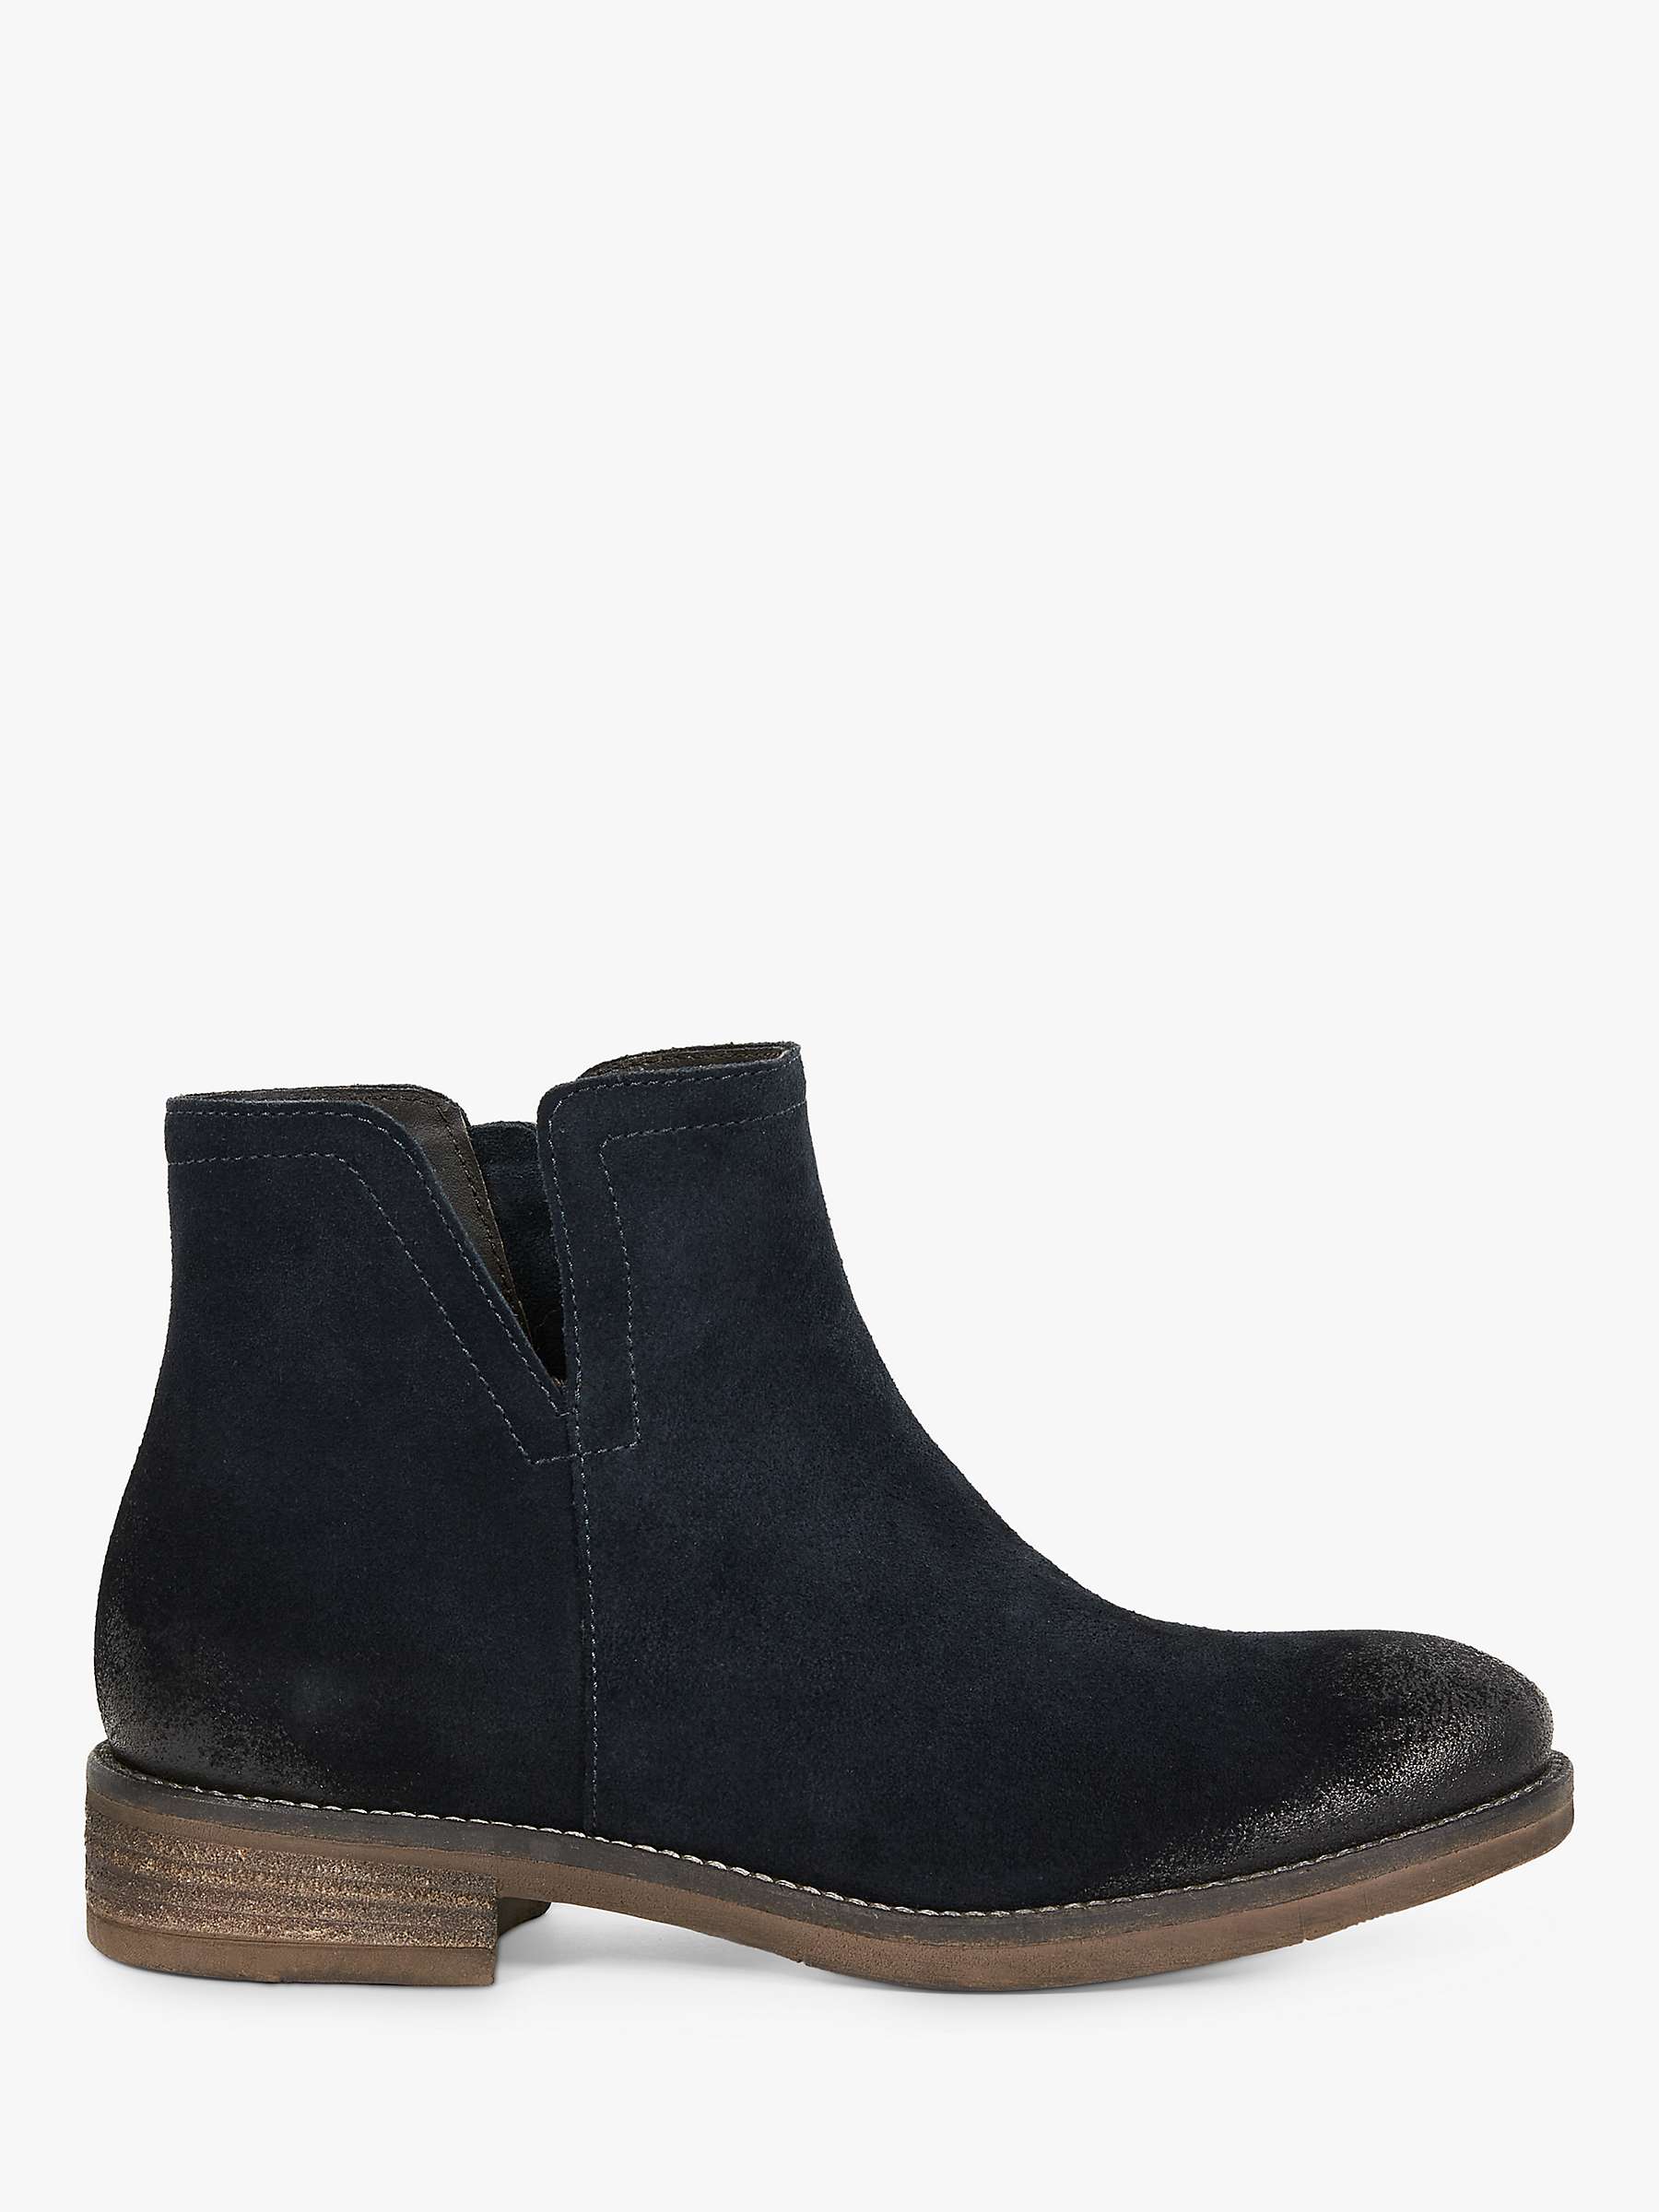 Buy Celtic & Co. Suede Notched Ankle Boots, Navy Online at johnlewis.com